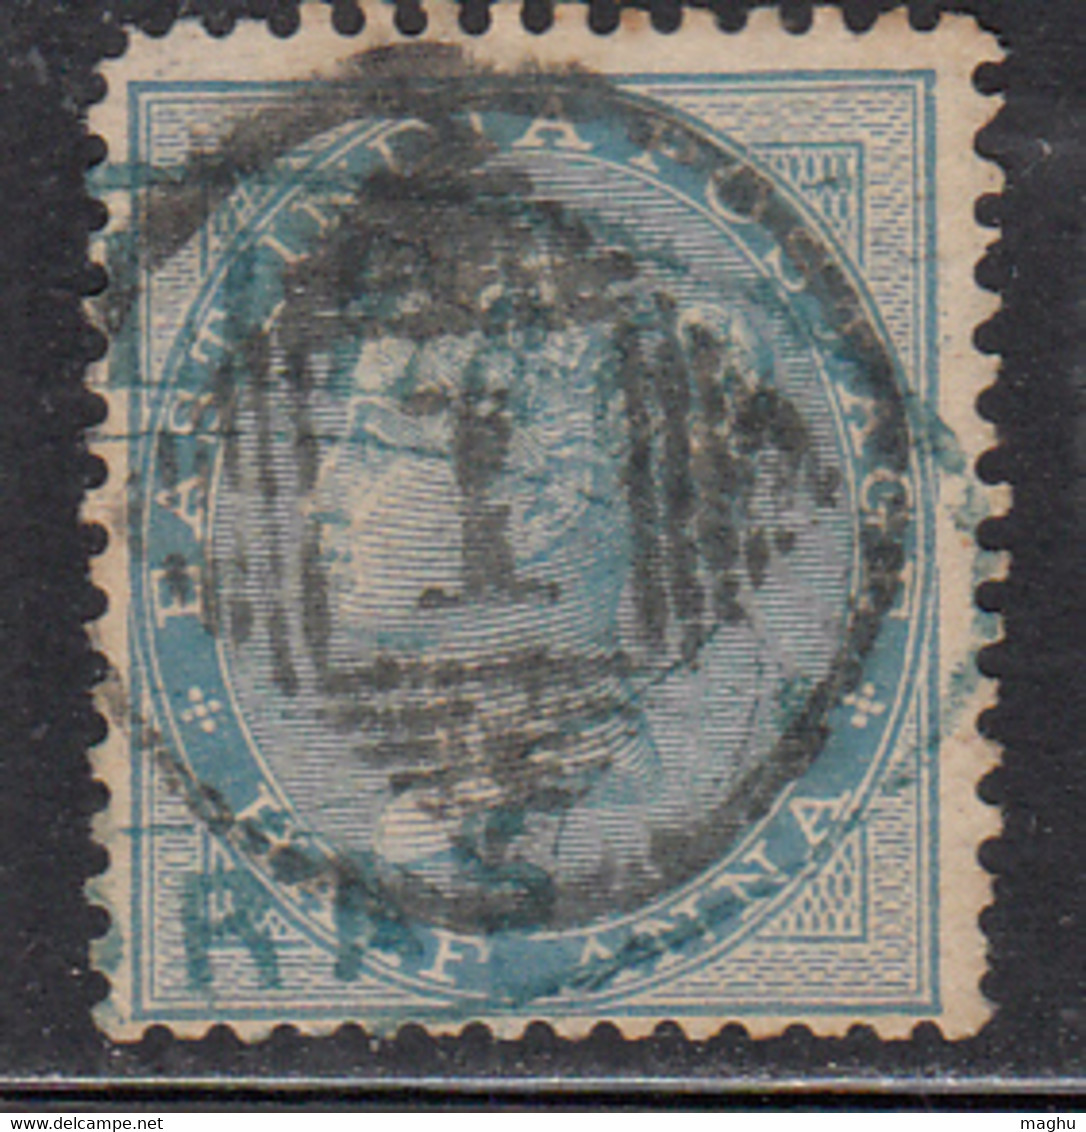 '1' Madras Distict, Madras Circle/ Cooper / Renouf Type 9a, British East India Used, Early Indian Cancellations - 1854 Britse Indische Compagnie